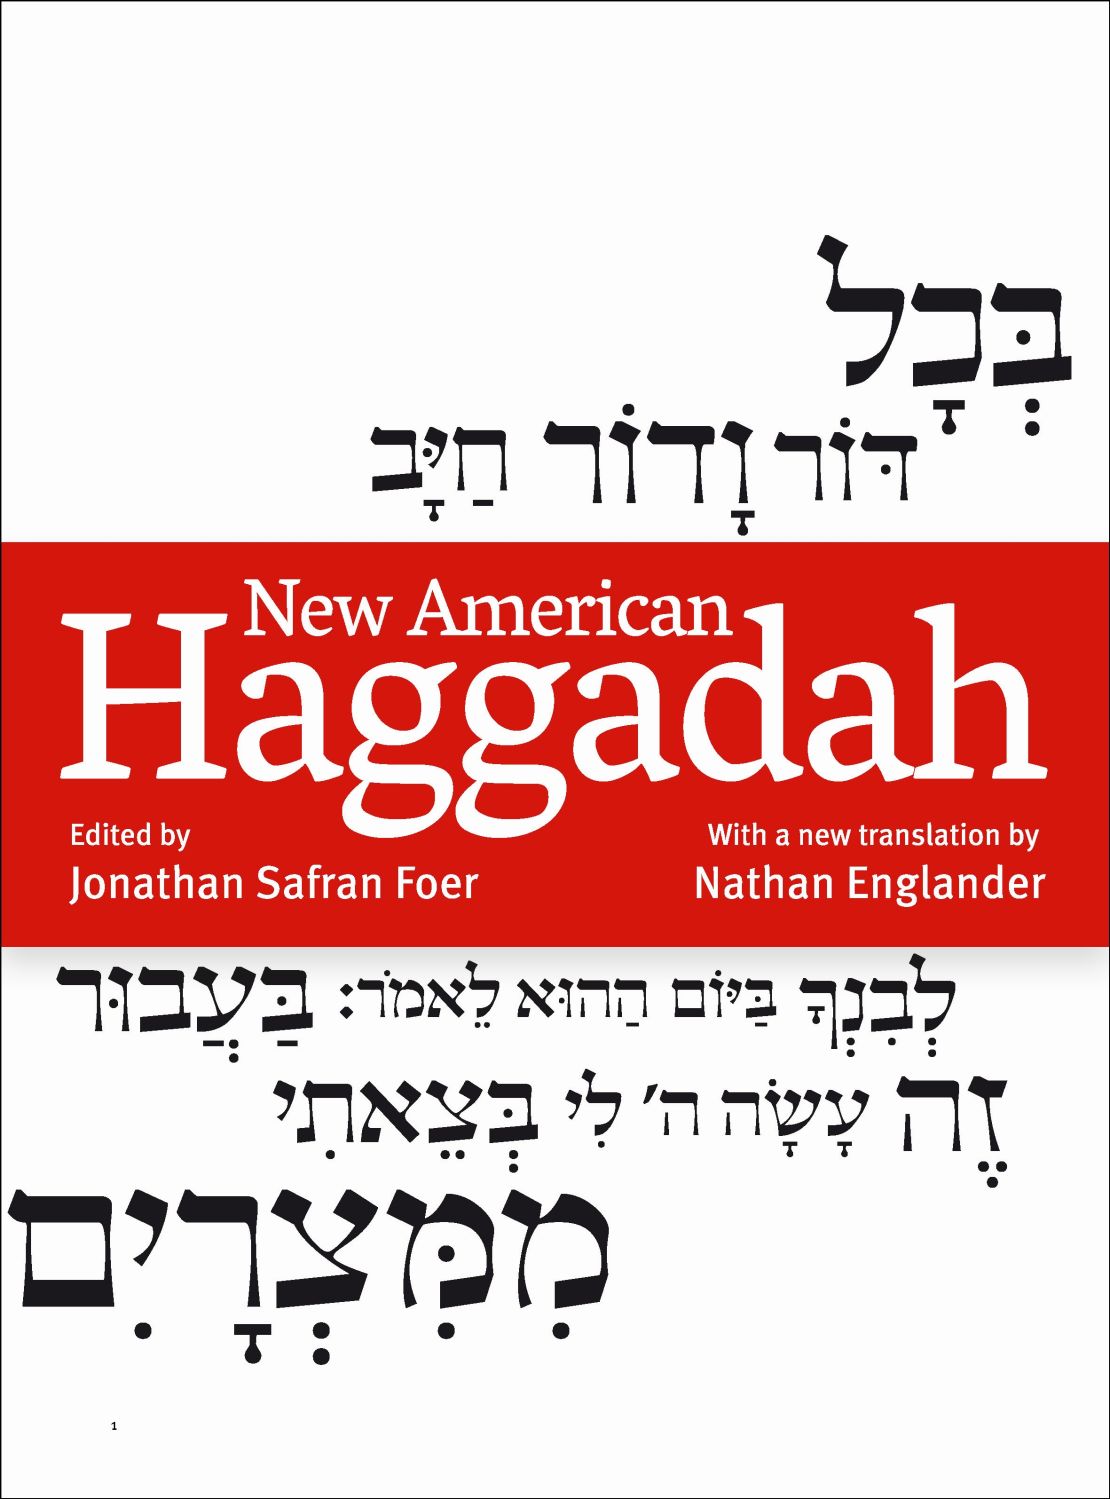 Foer sought out writer Nathan Englander to translate from the original Hebrew for the Passover hagaddah.